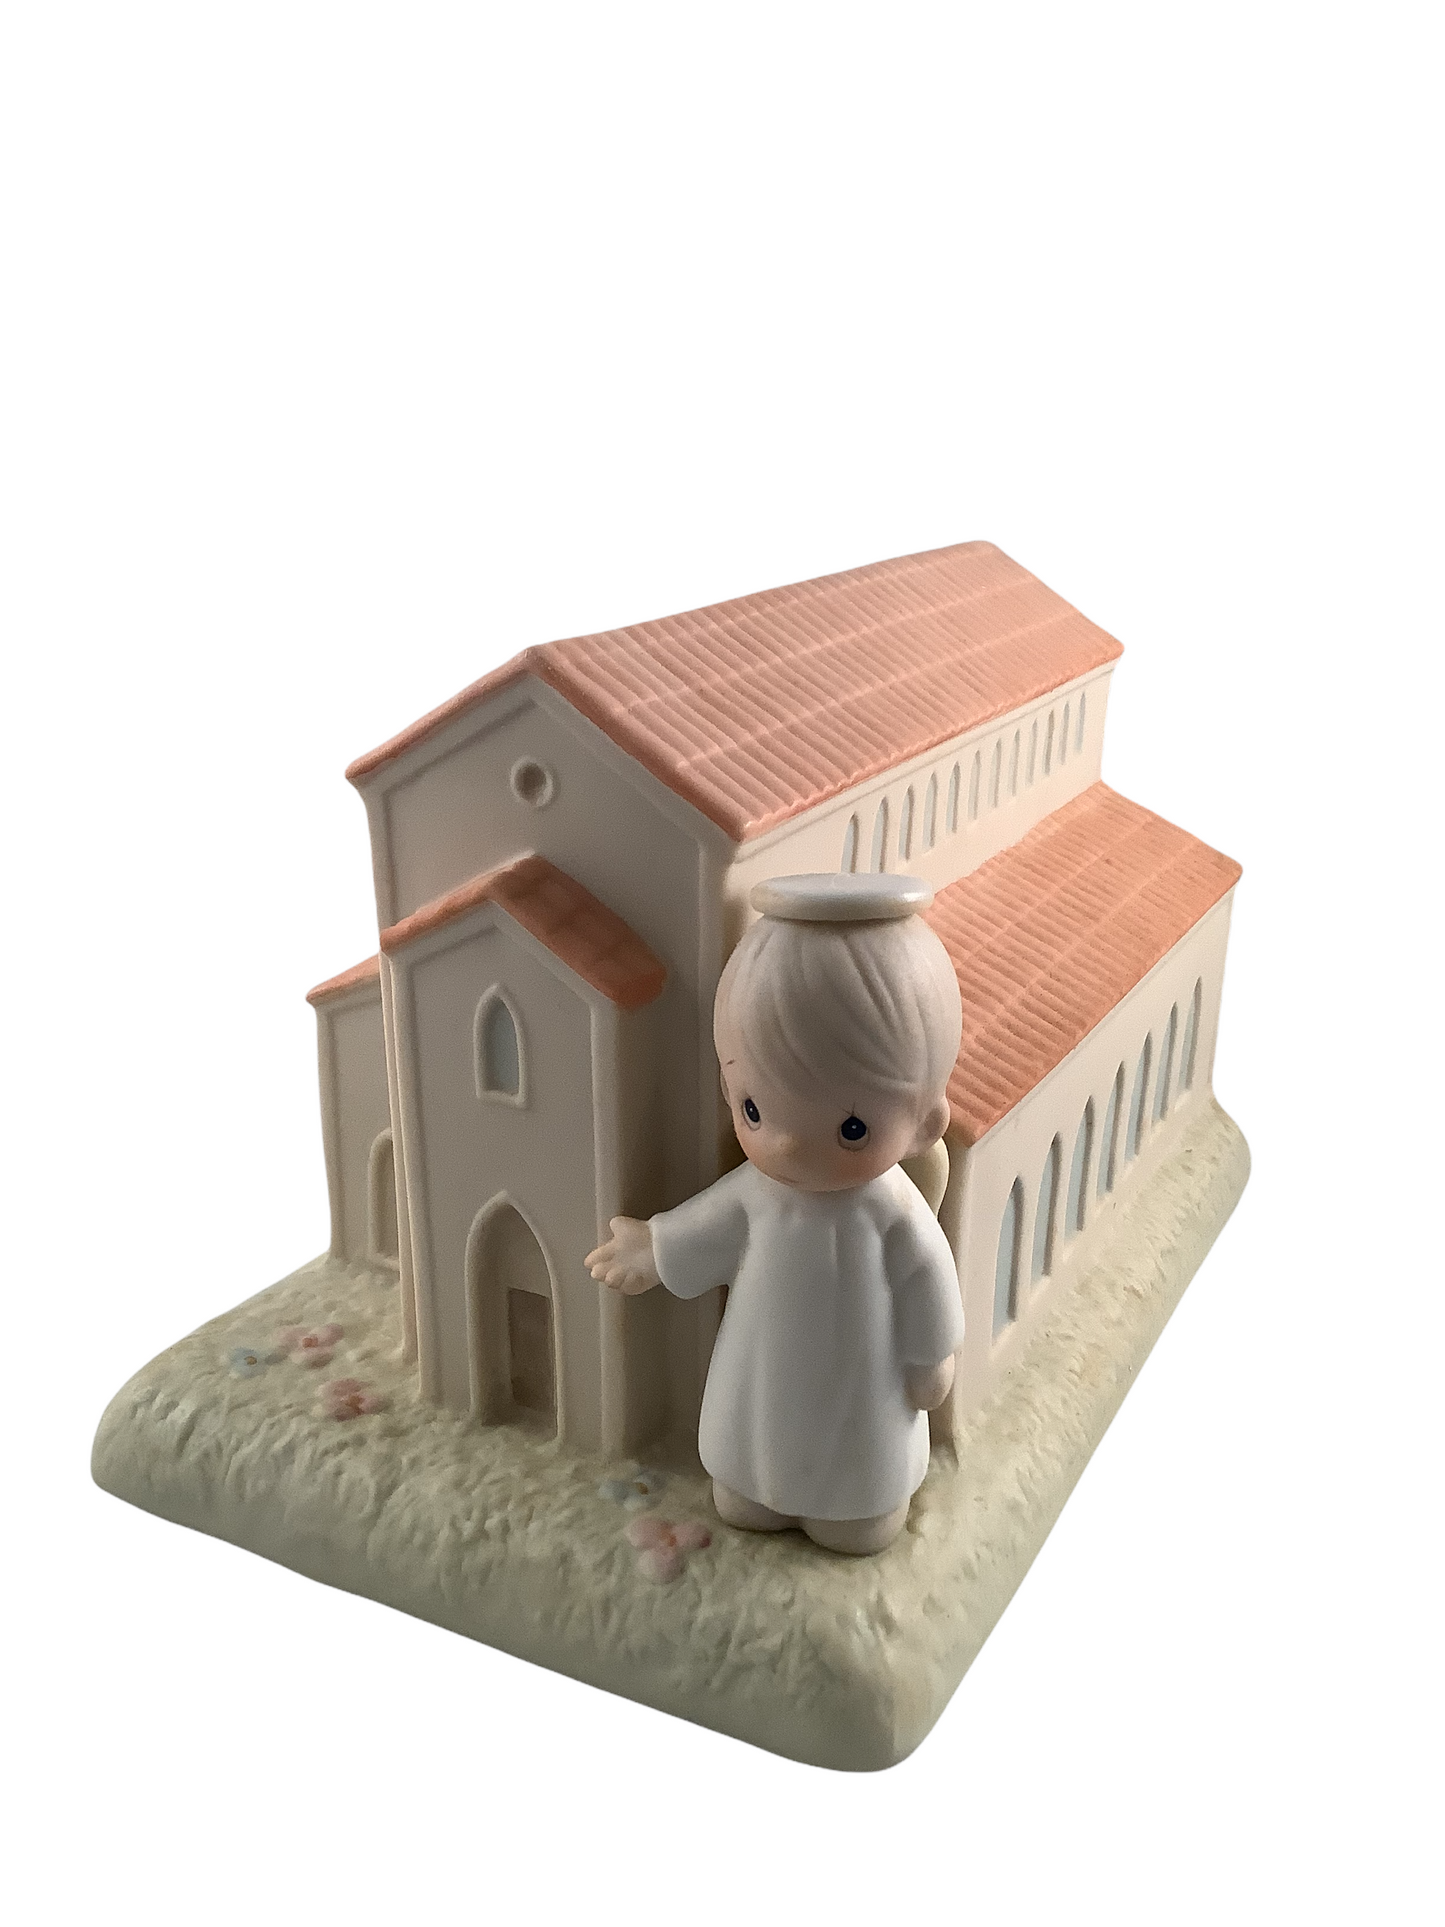 There's A Christian Welcome Here - Precious Moment Figurine